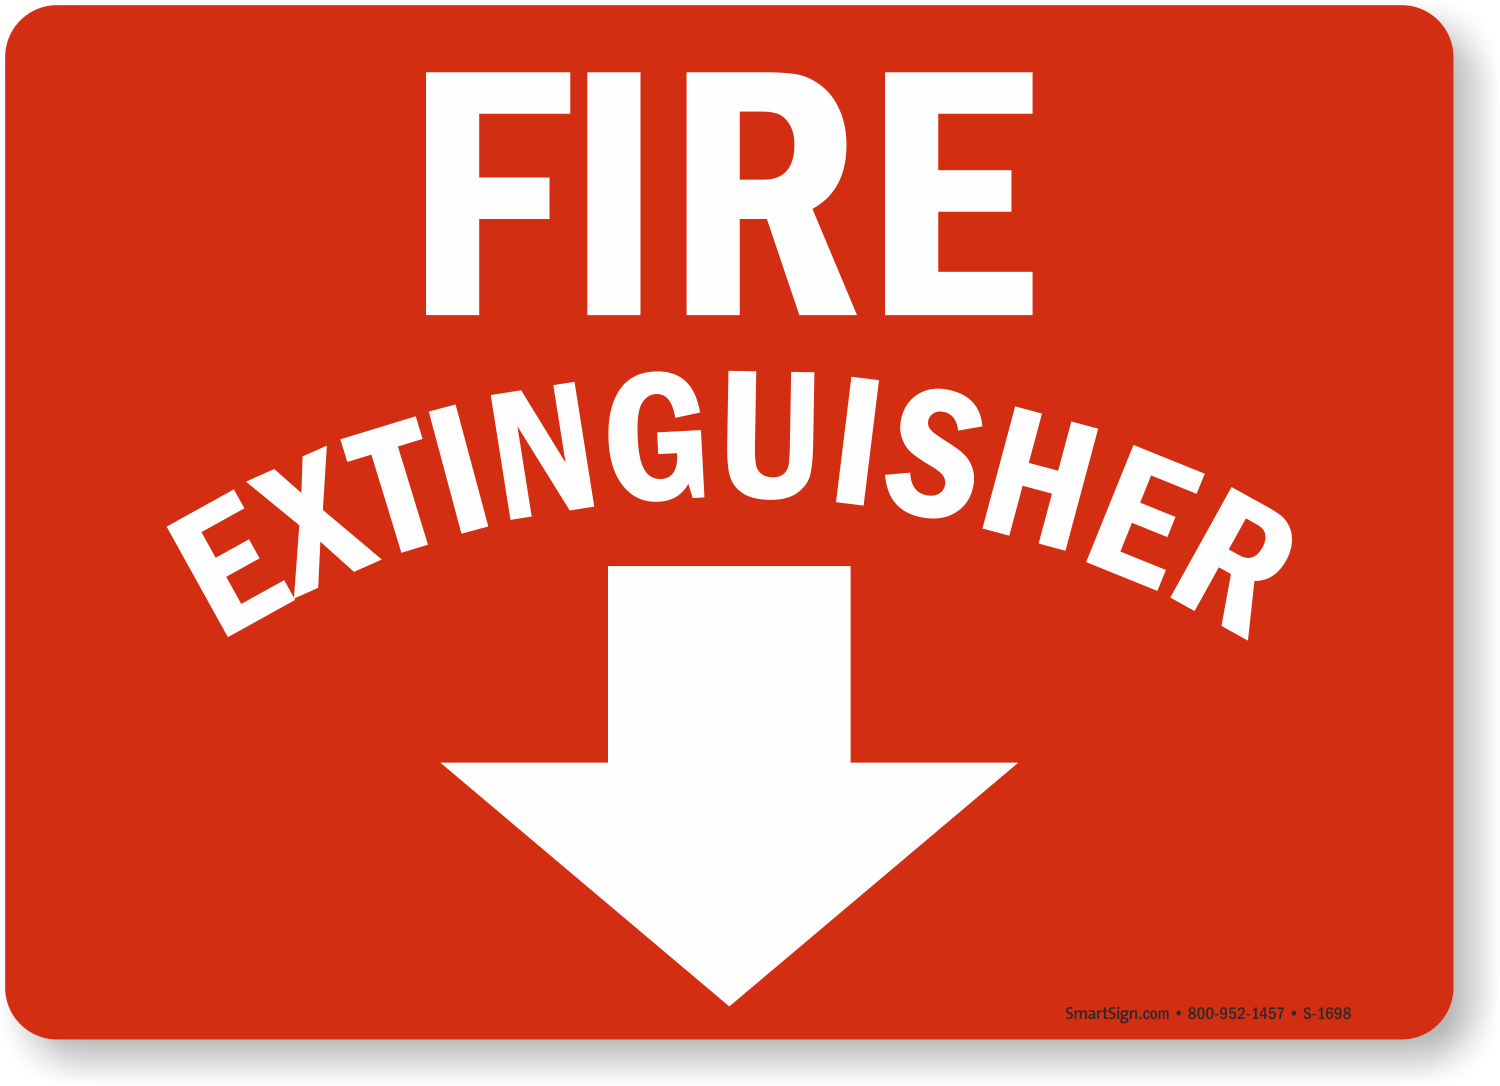 33-best-photos-free-co2-fire-extinguisher-signs-co2-fire-extinguisher-id-sign-100mm-x-280